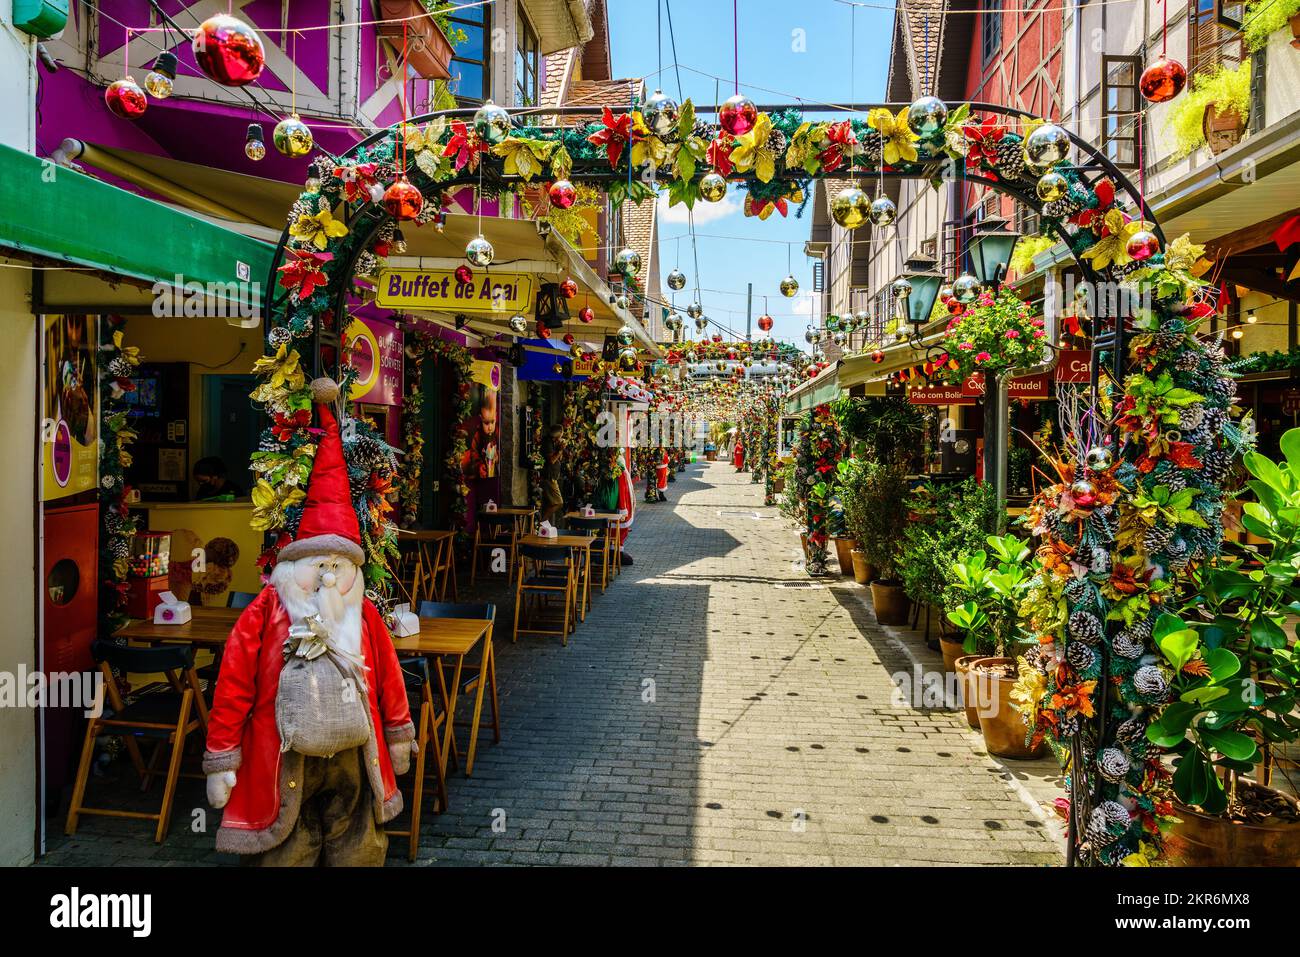 Blumenau, Brazil, January 20, 2022: Traditional shops with Christmas decorations in German Village in the city of Blumenau, Brazil Stock Photo